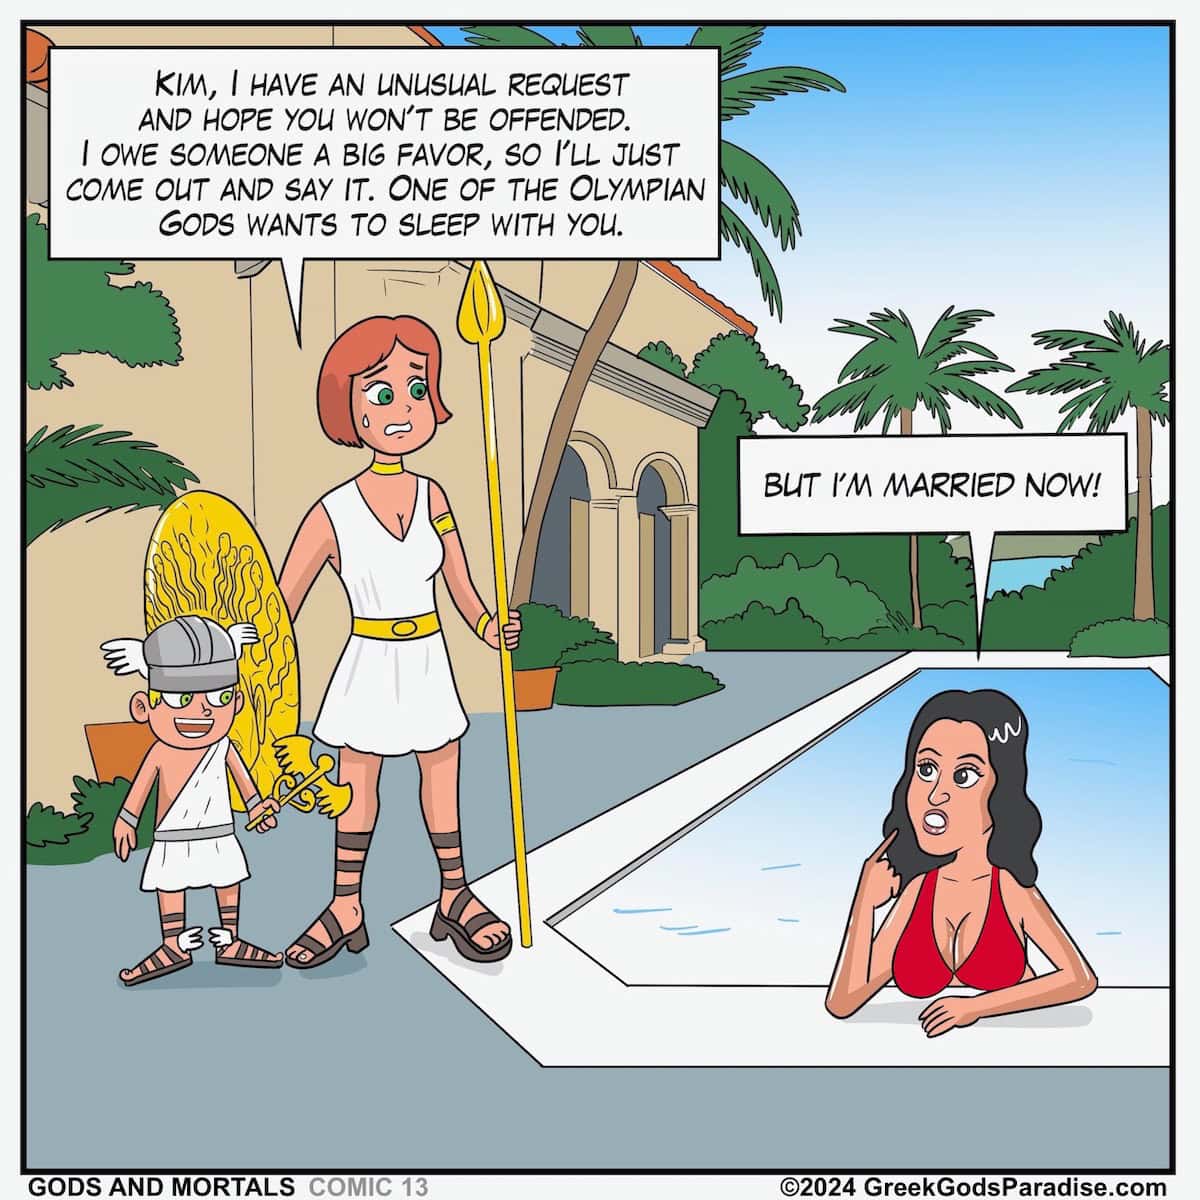 Kim Kardashian talking to Greek Gods Athena and Hermes while relaxing in a hotel pool